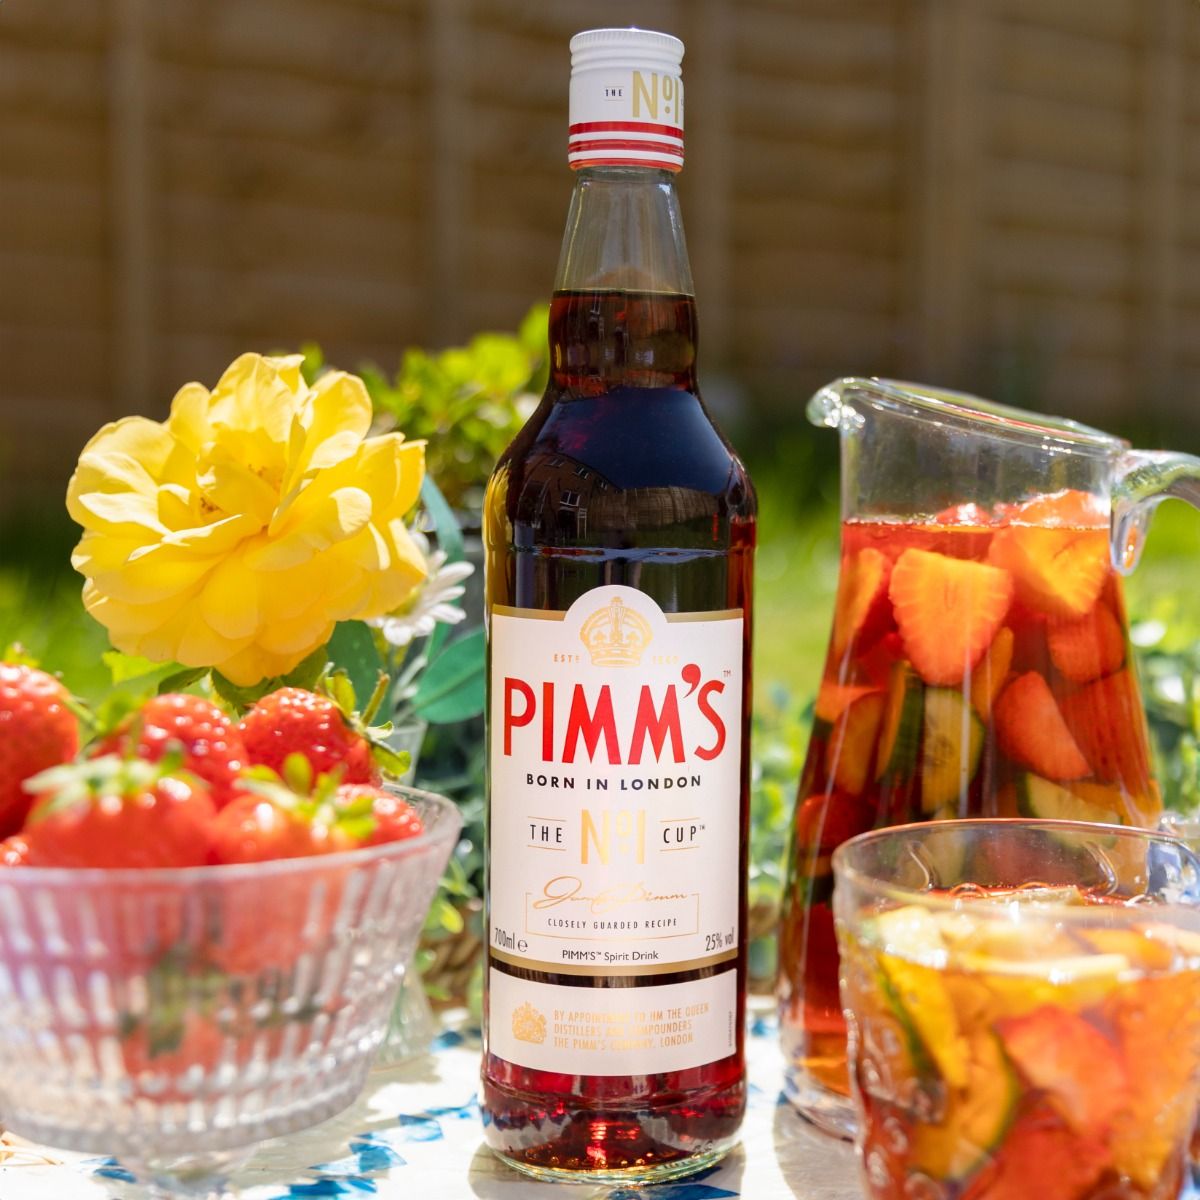 Bottle of Pimms on a table in garden with a drink a glass of Pimm's punch next to it